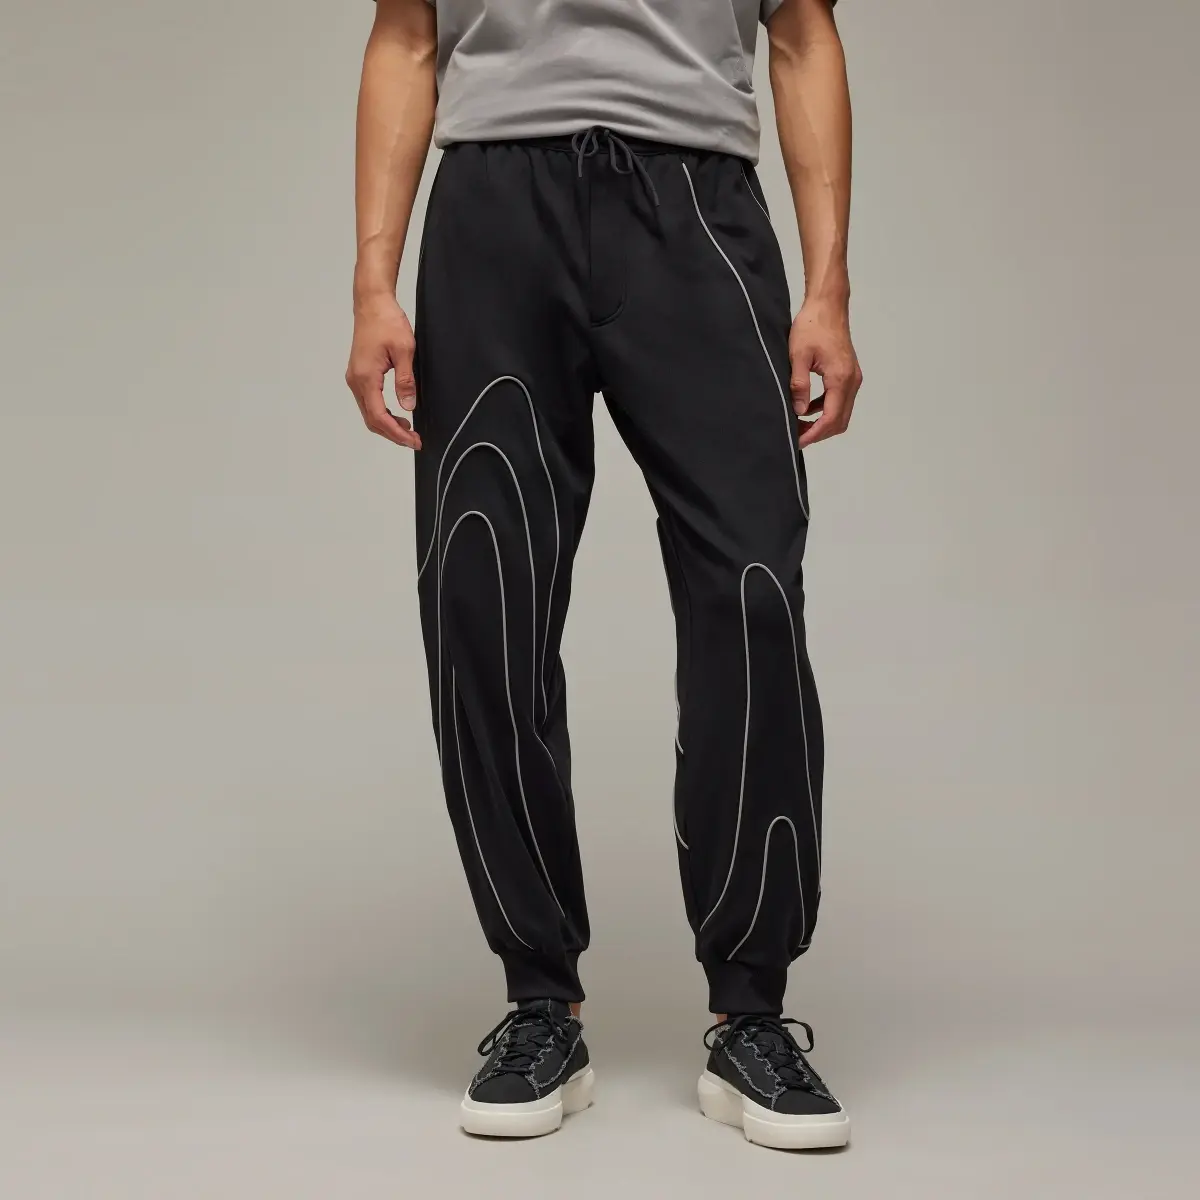 Adidas Y-3 Tracksuit Bottoms. 1